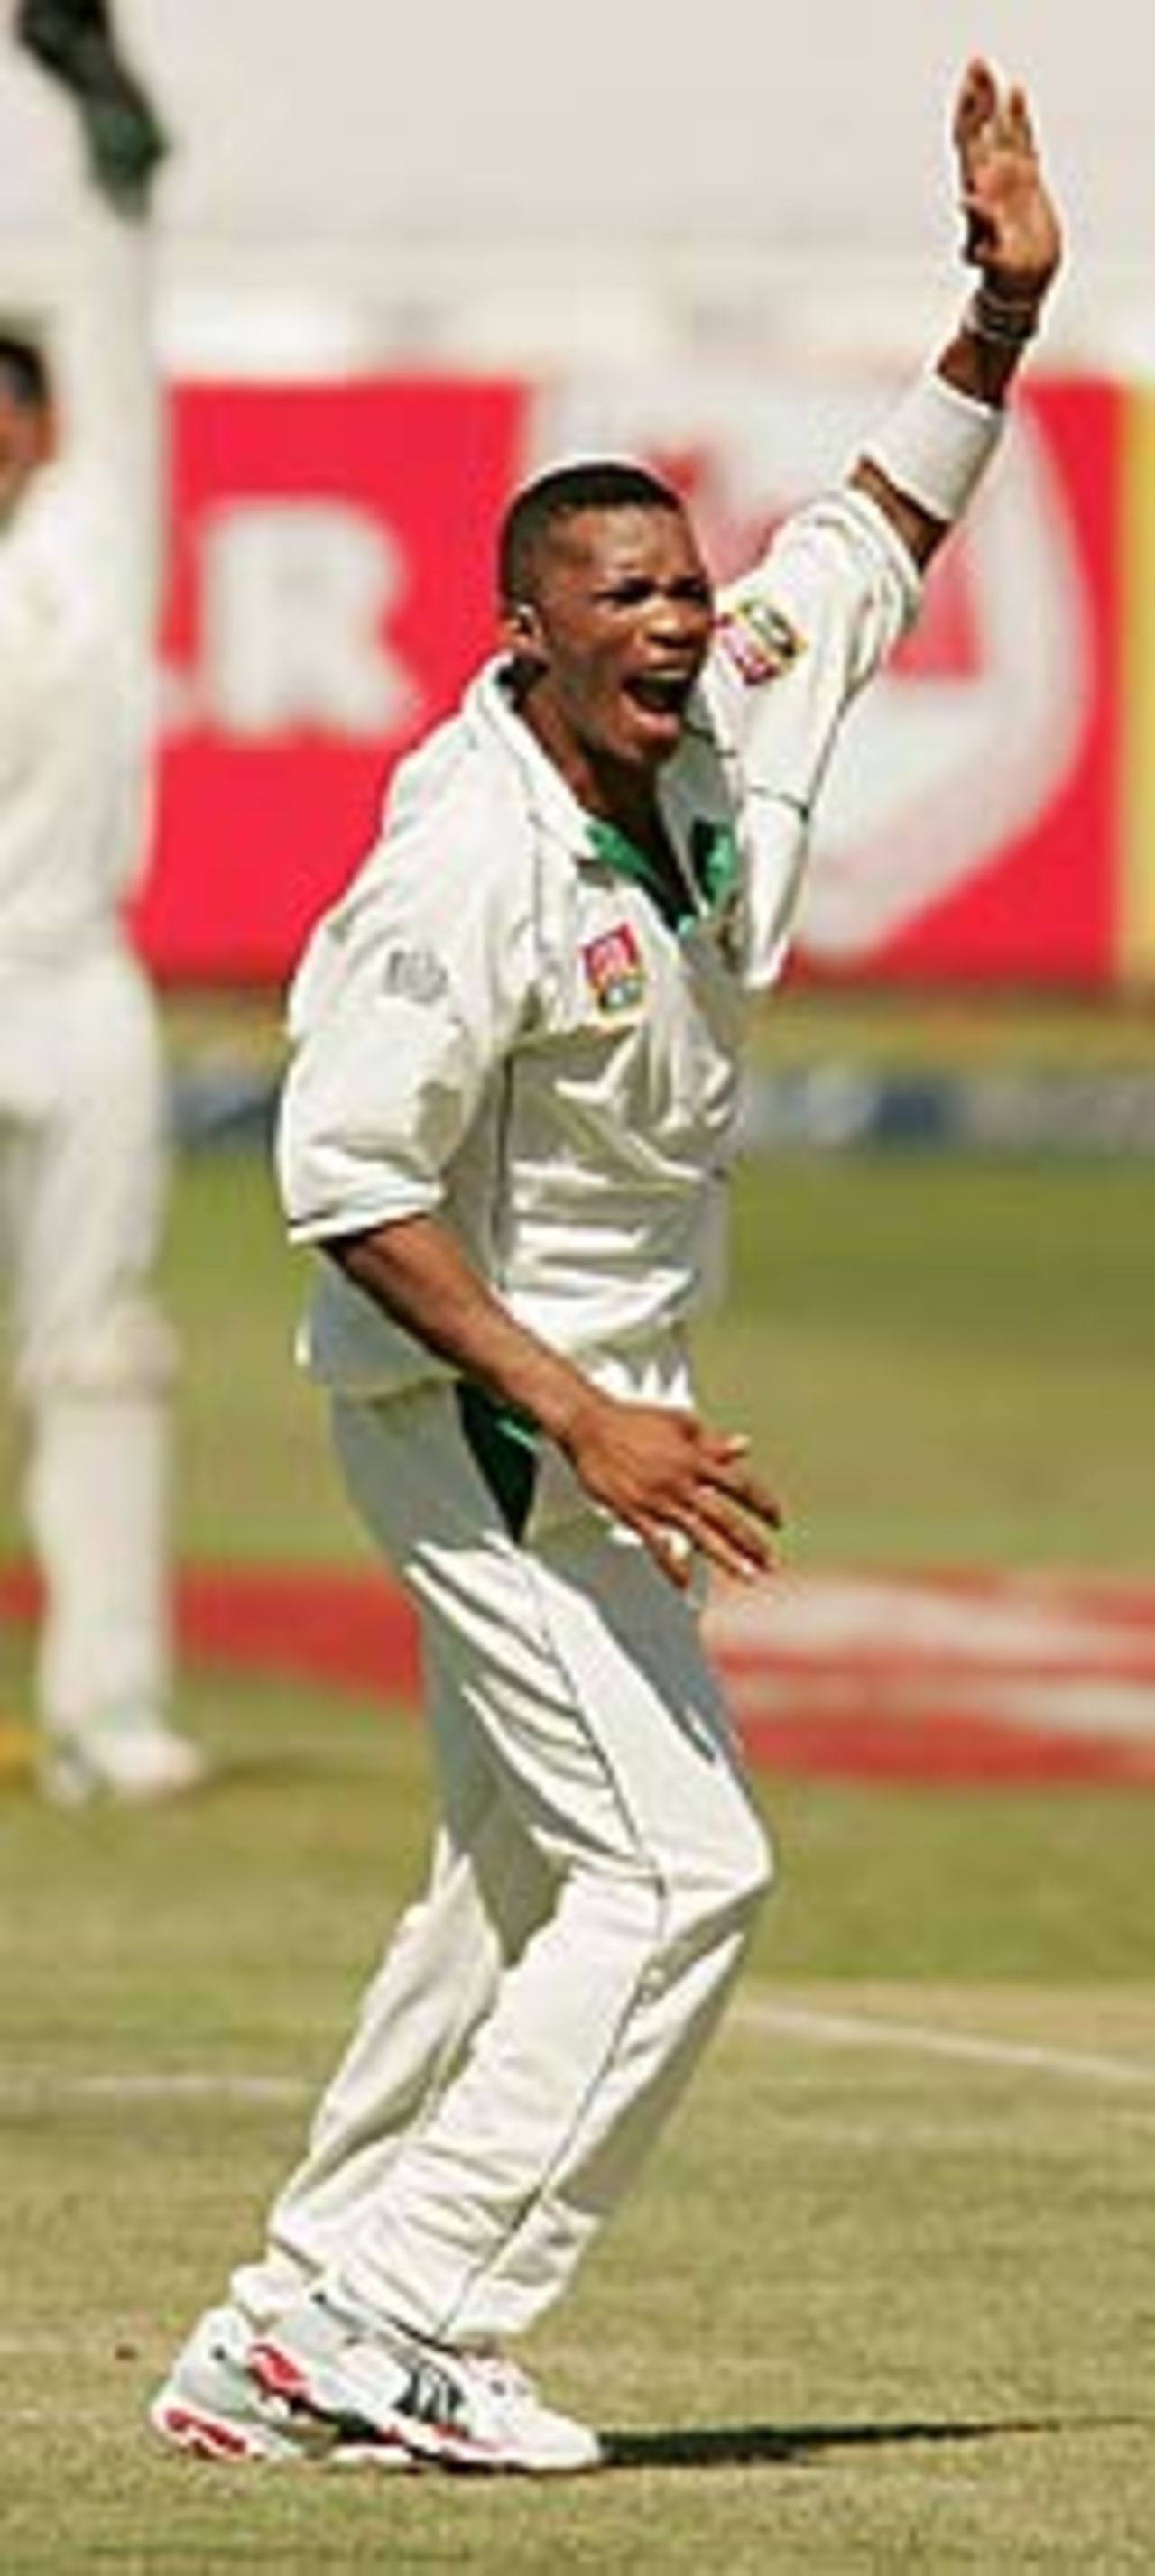 Makhaya Ntini appeals - unsuccessfully - for lbw against Dion Ebrahim, South Africa v Zimbabwe, 1st Test, Cape Town, March 5, 2005